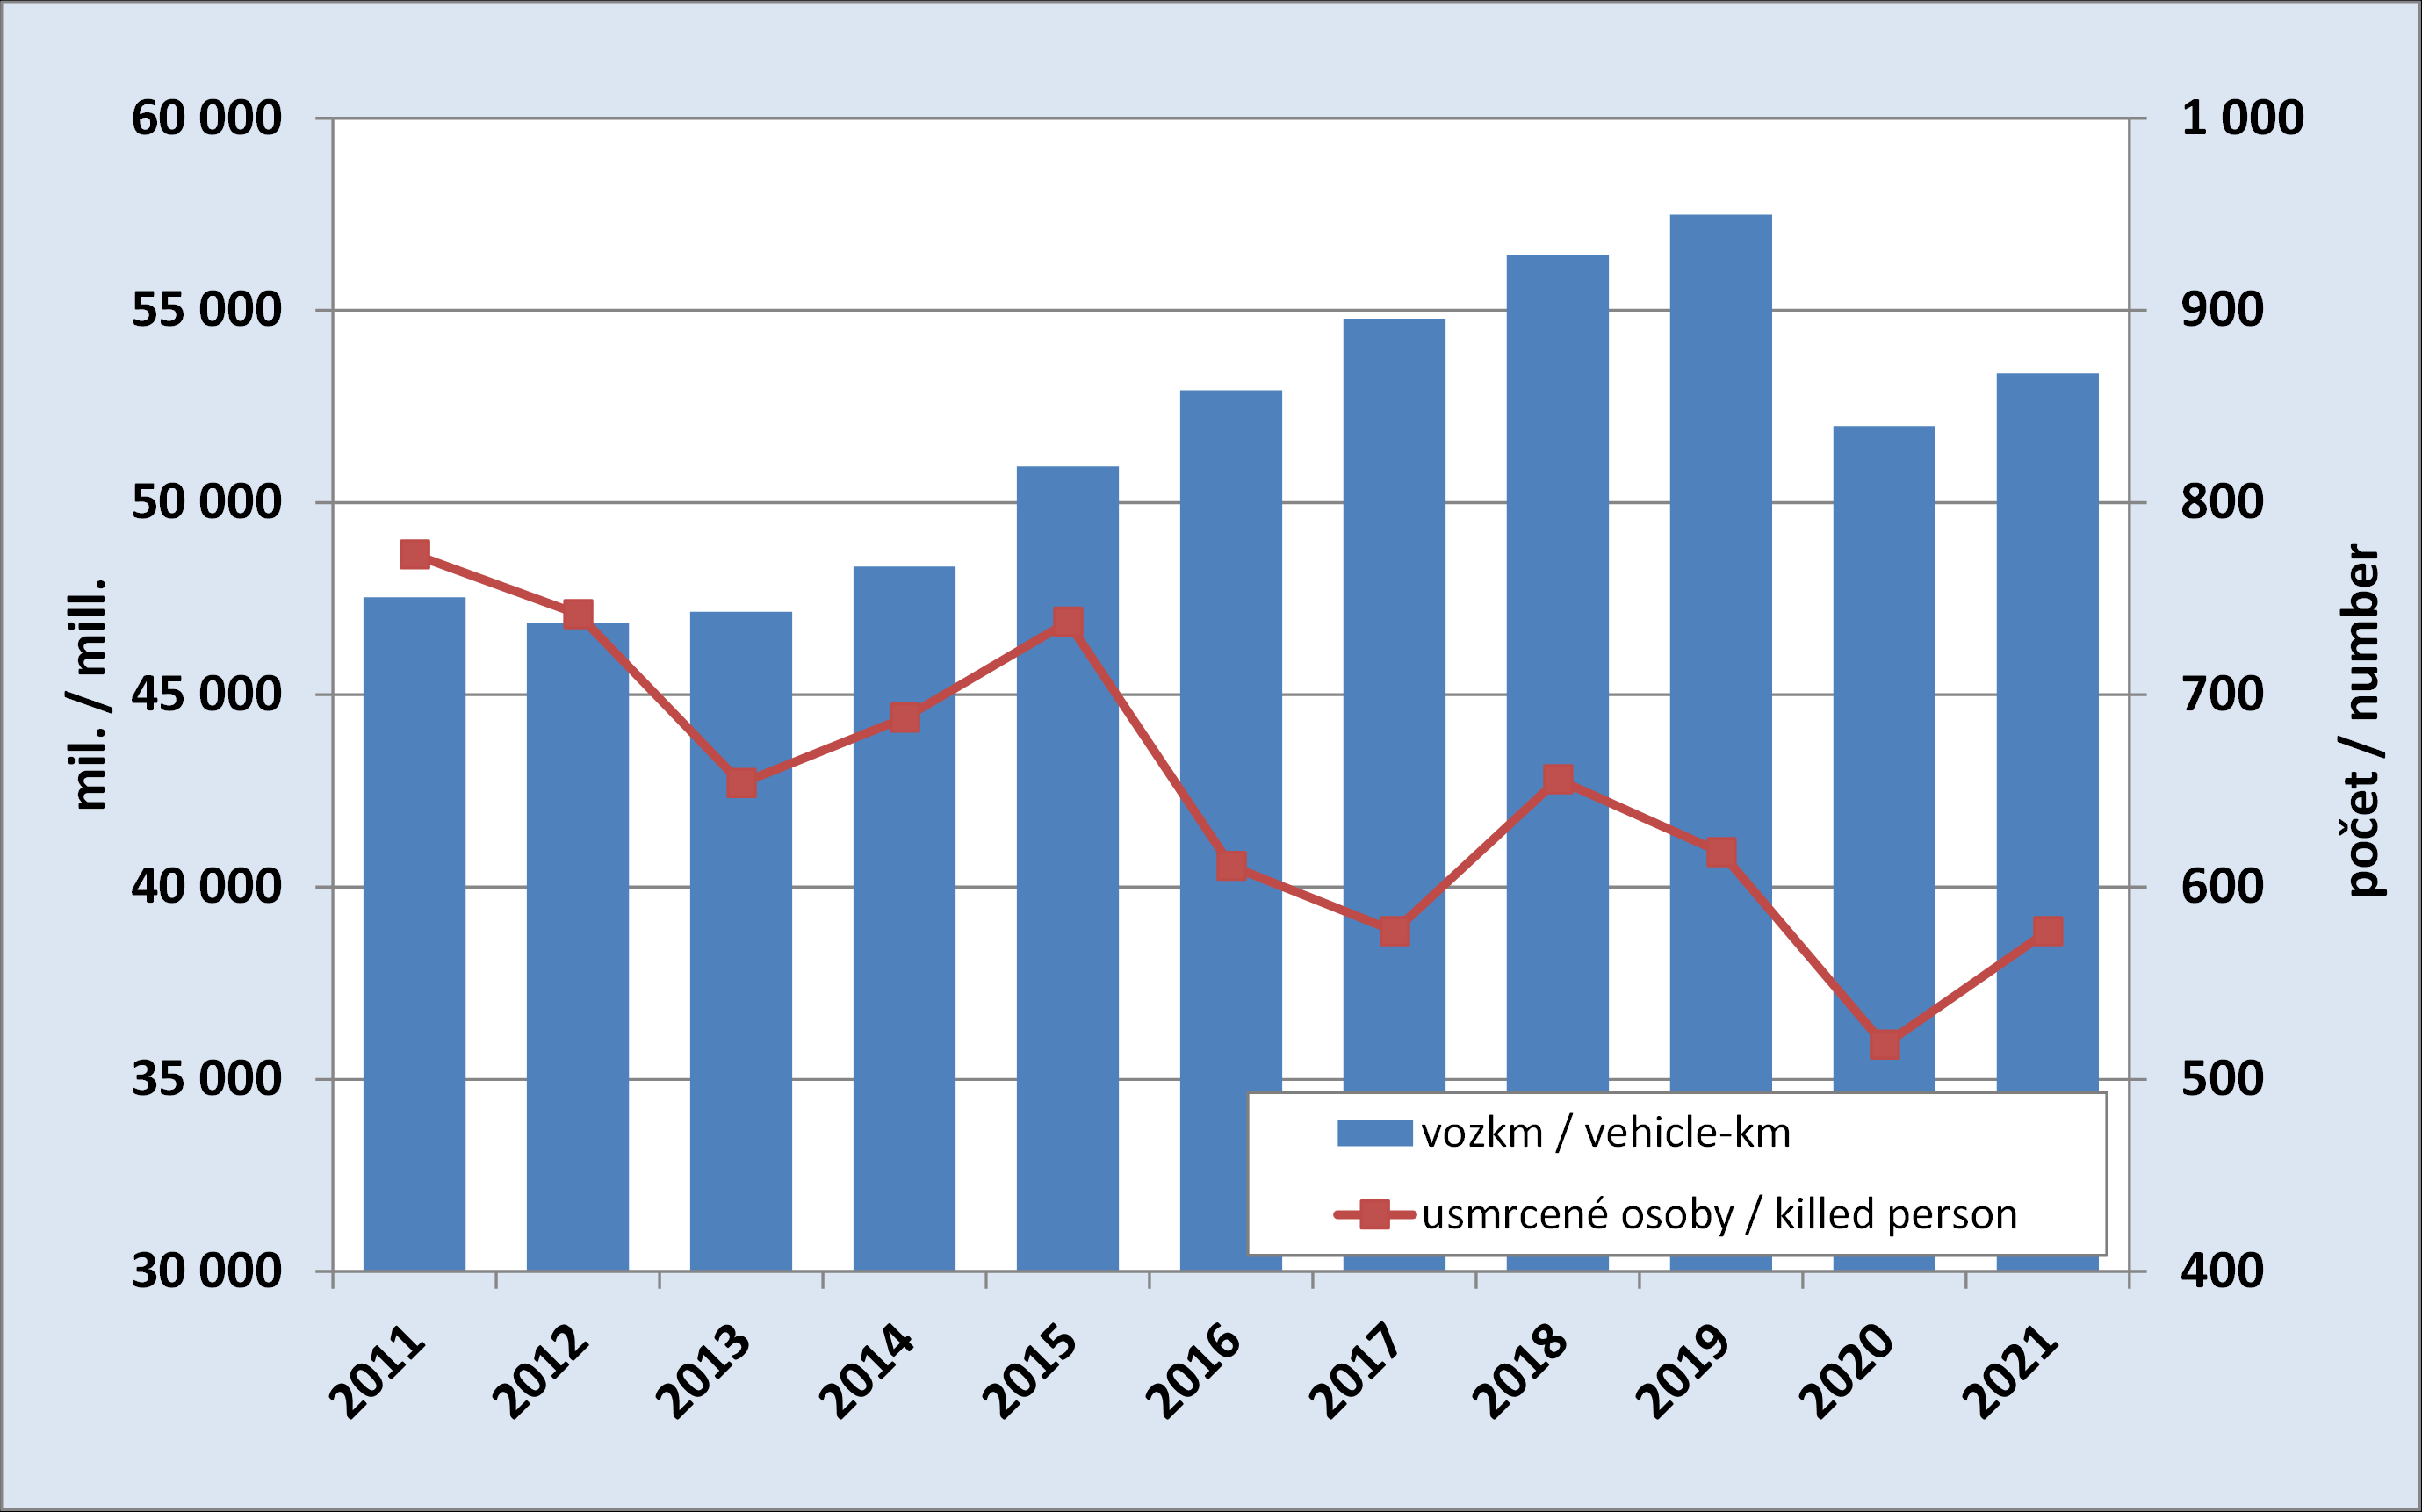 8.7. Development of the estimated vehicle kilometres in the road transport and number of persons killed in the accidents